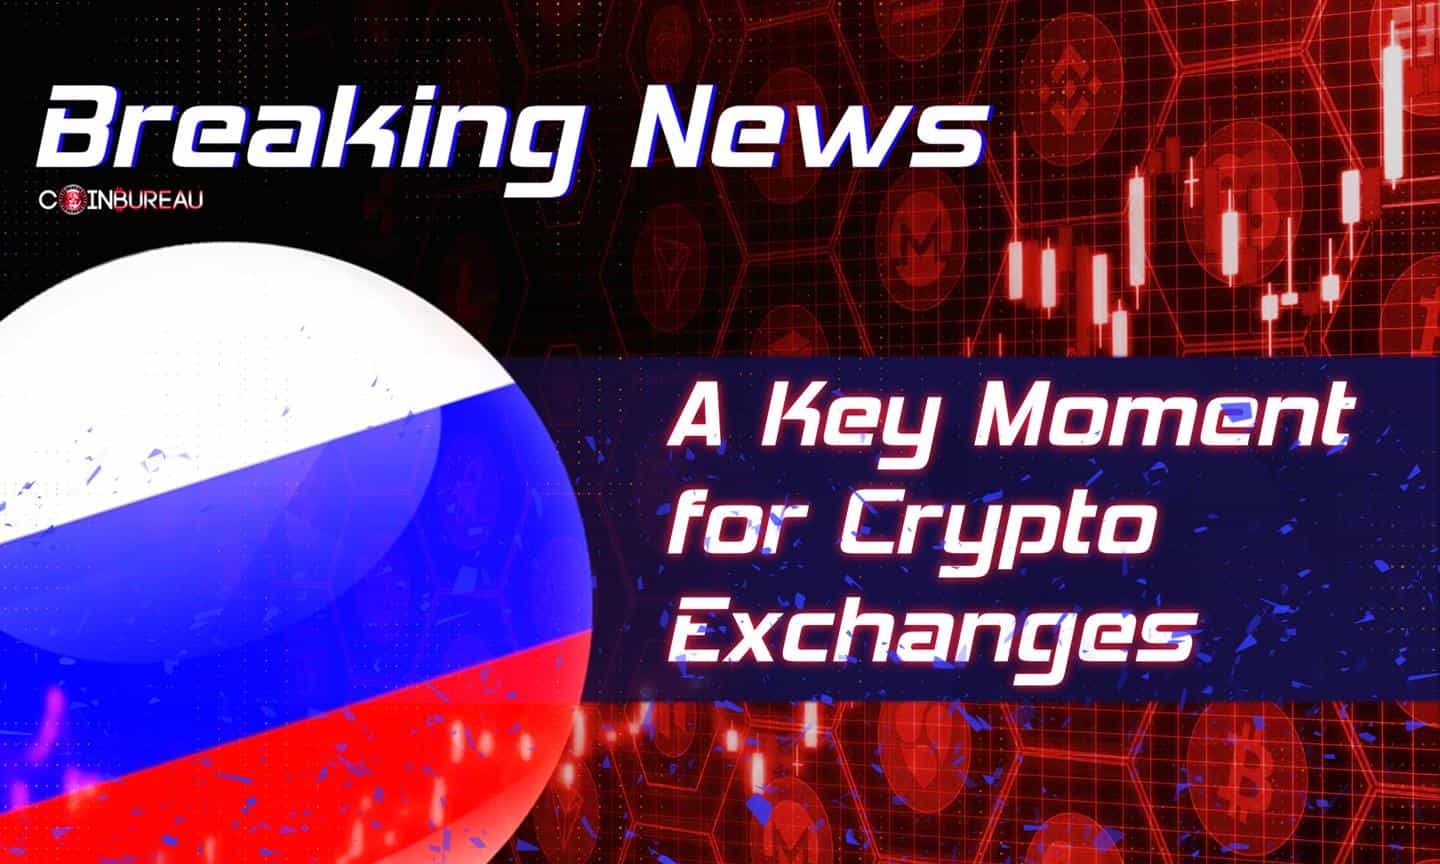 Russia Sanctions Pose a Key Moment for Crypto Exchanges